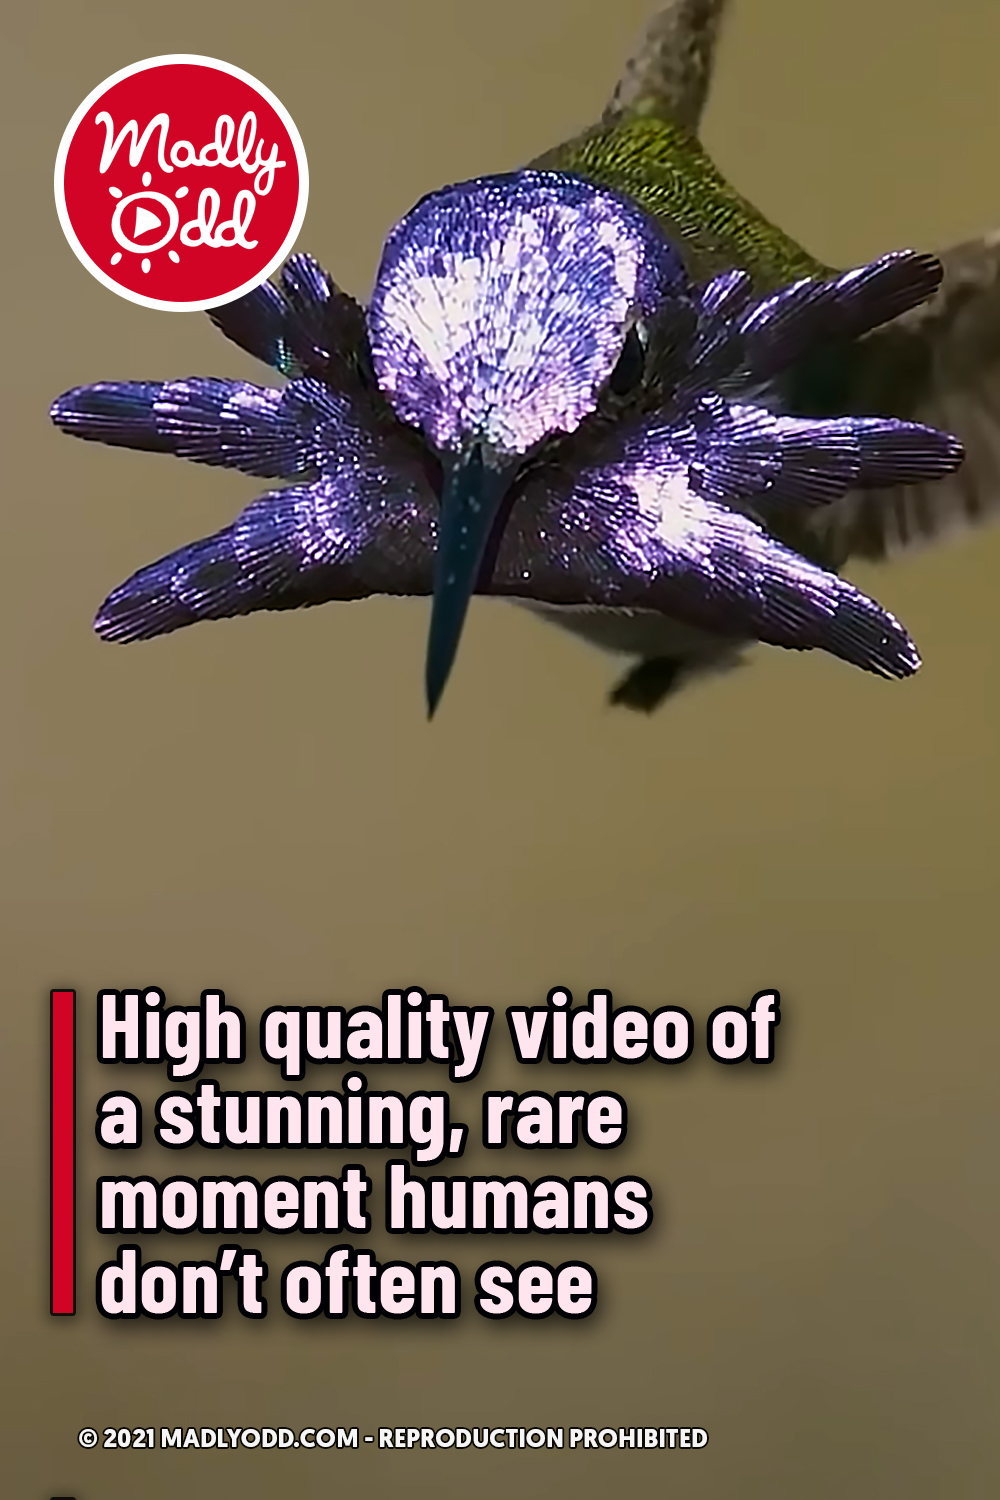 High quality video of a stunning, rare moment humans don’t often see